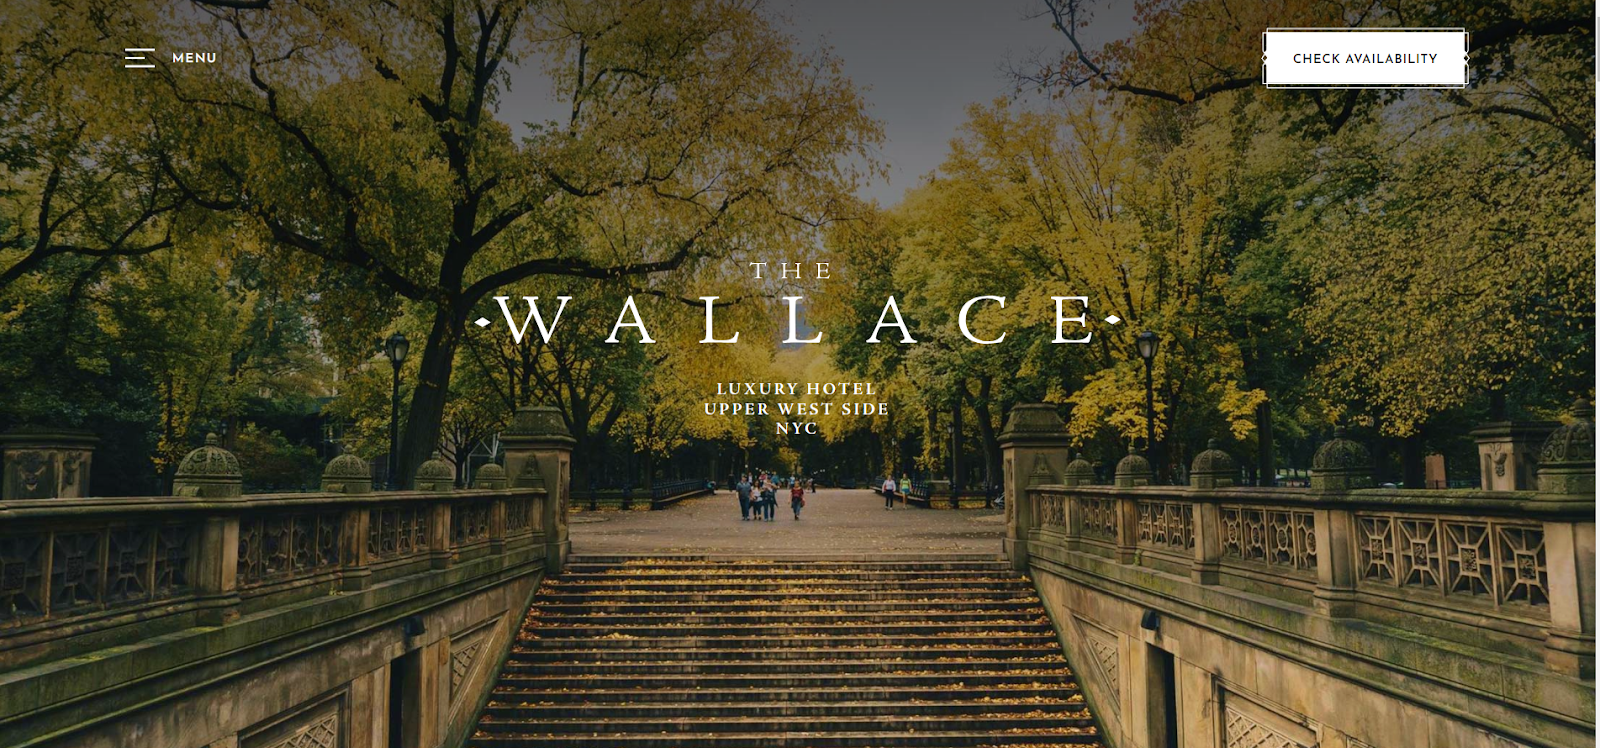 hotel website examples, the Wallace